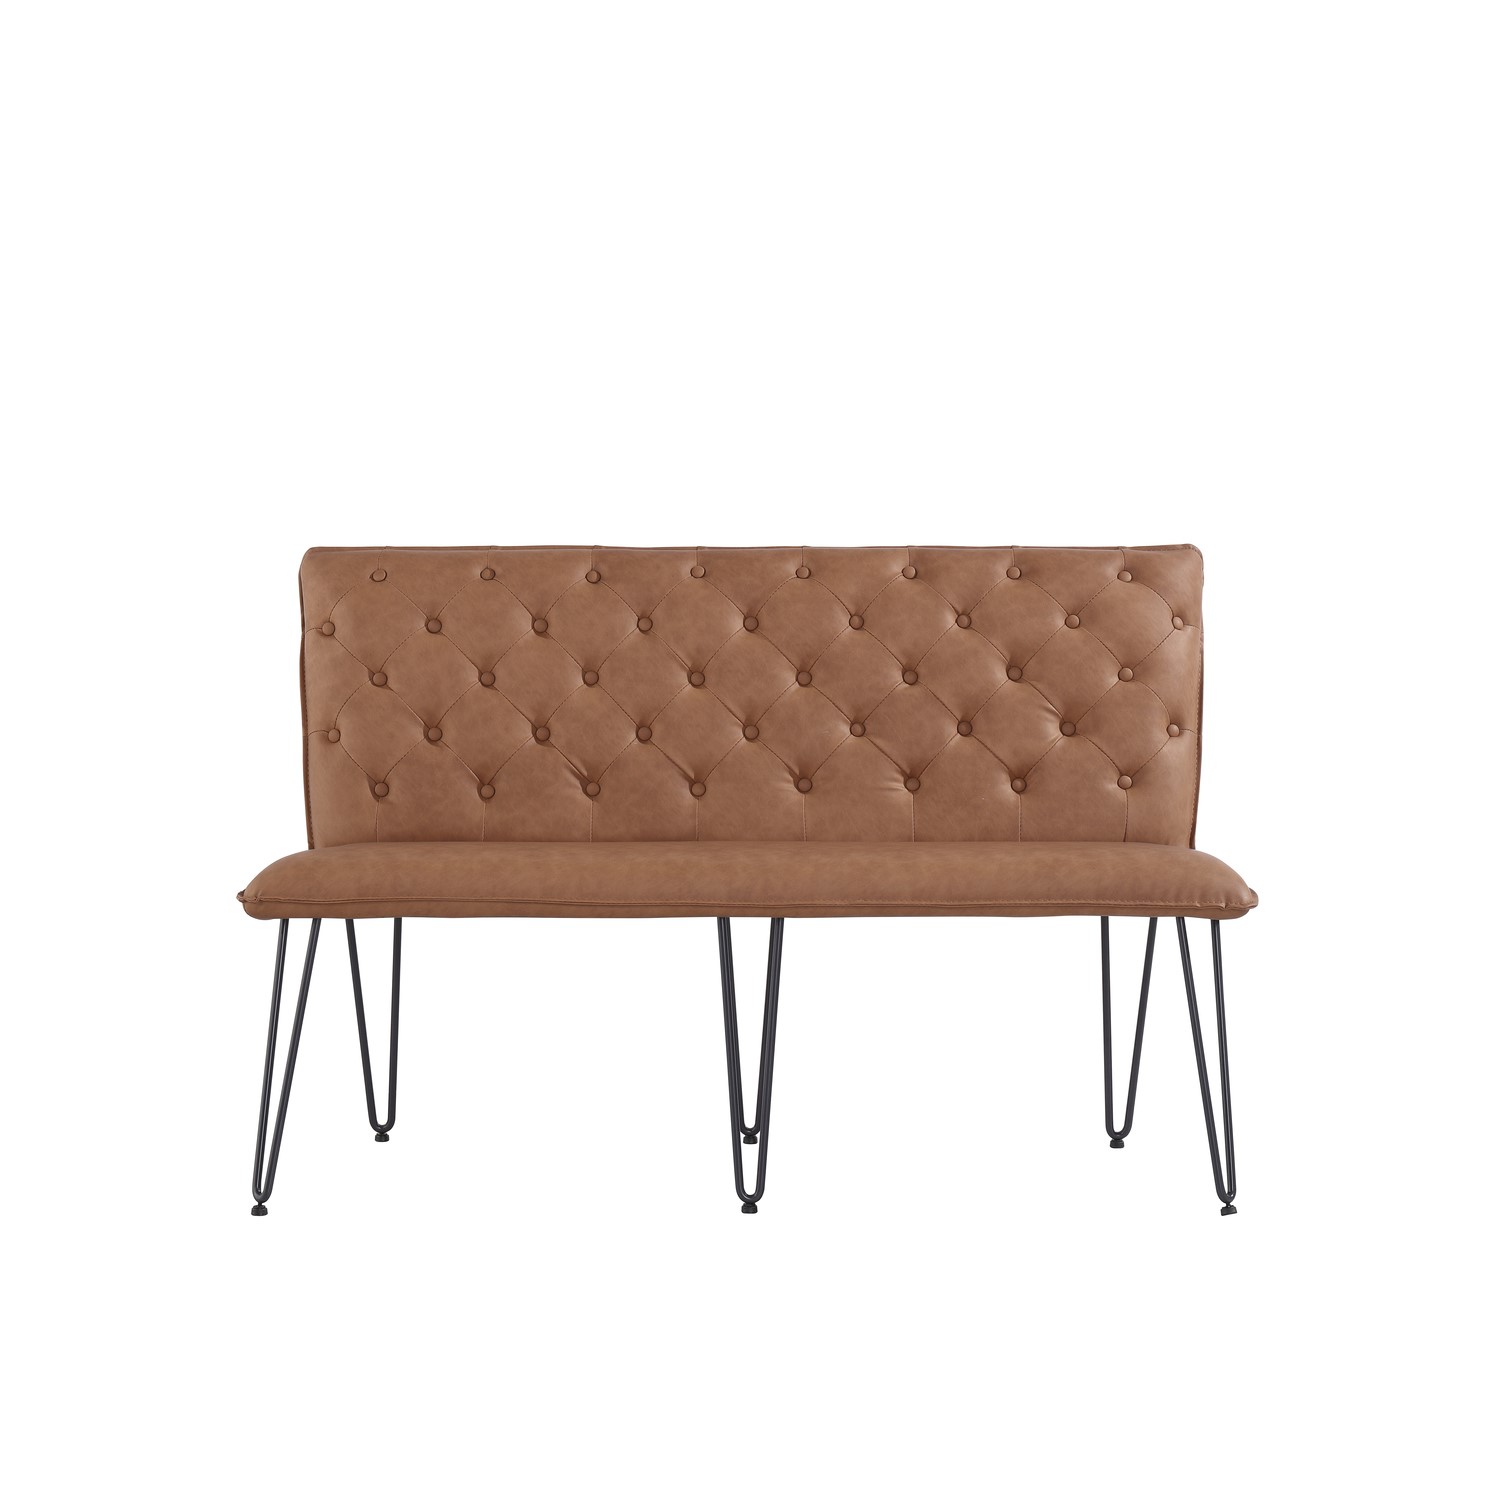 Small Tan Dining Bench With Studded, Leather Bench With Back